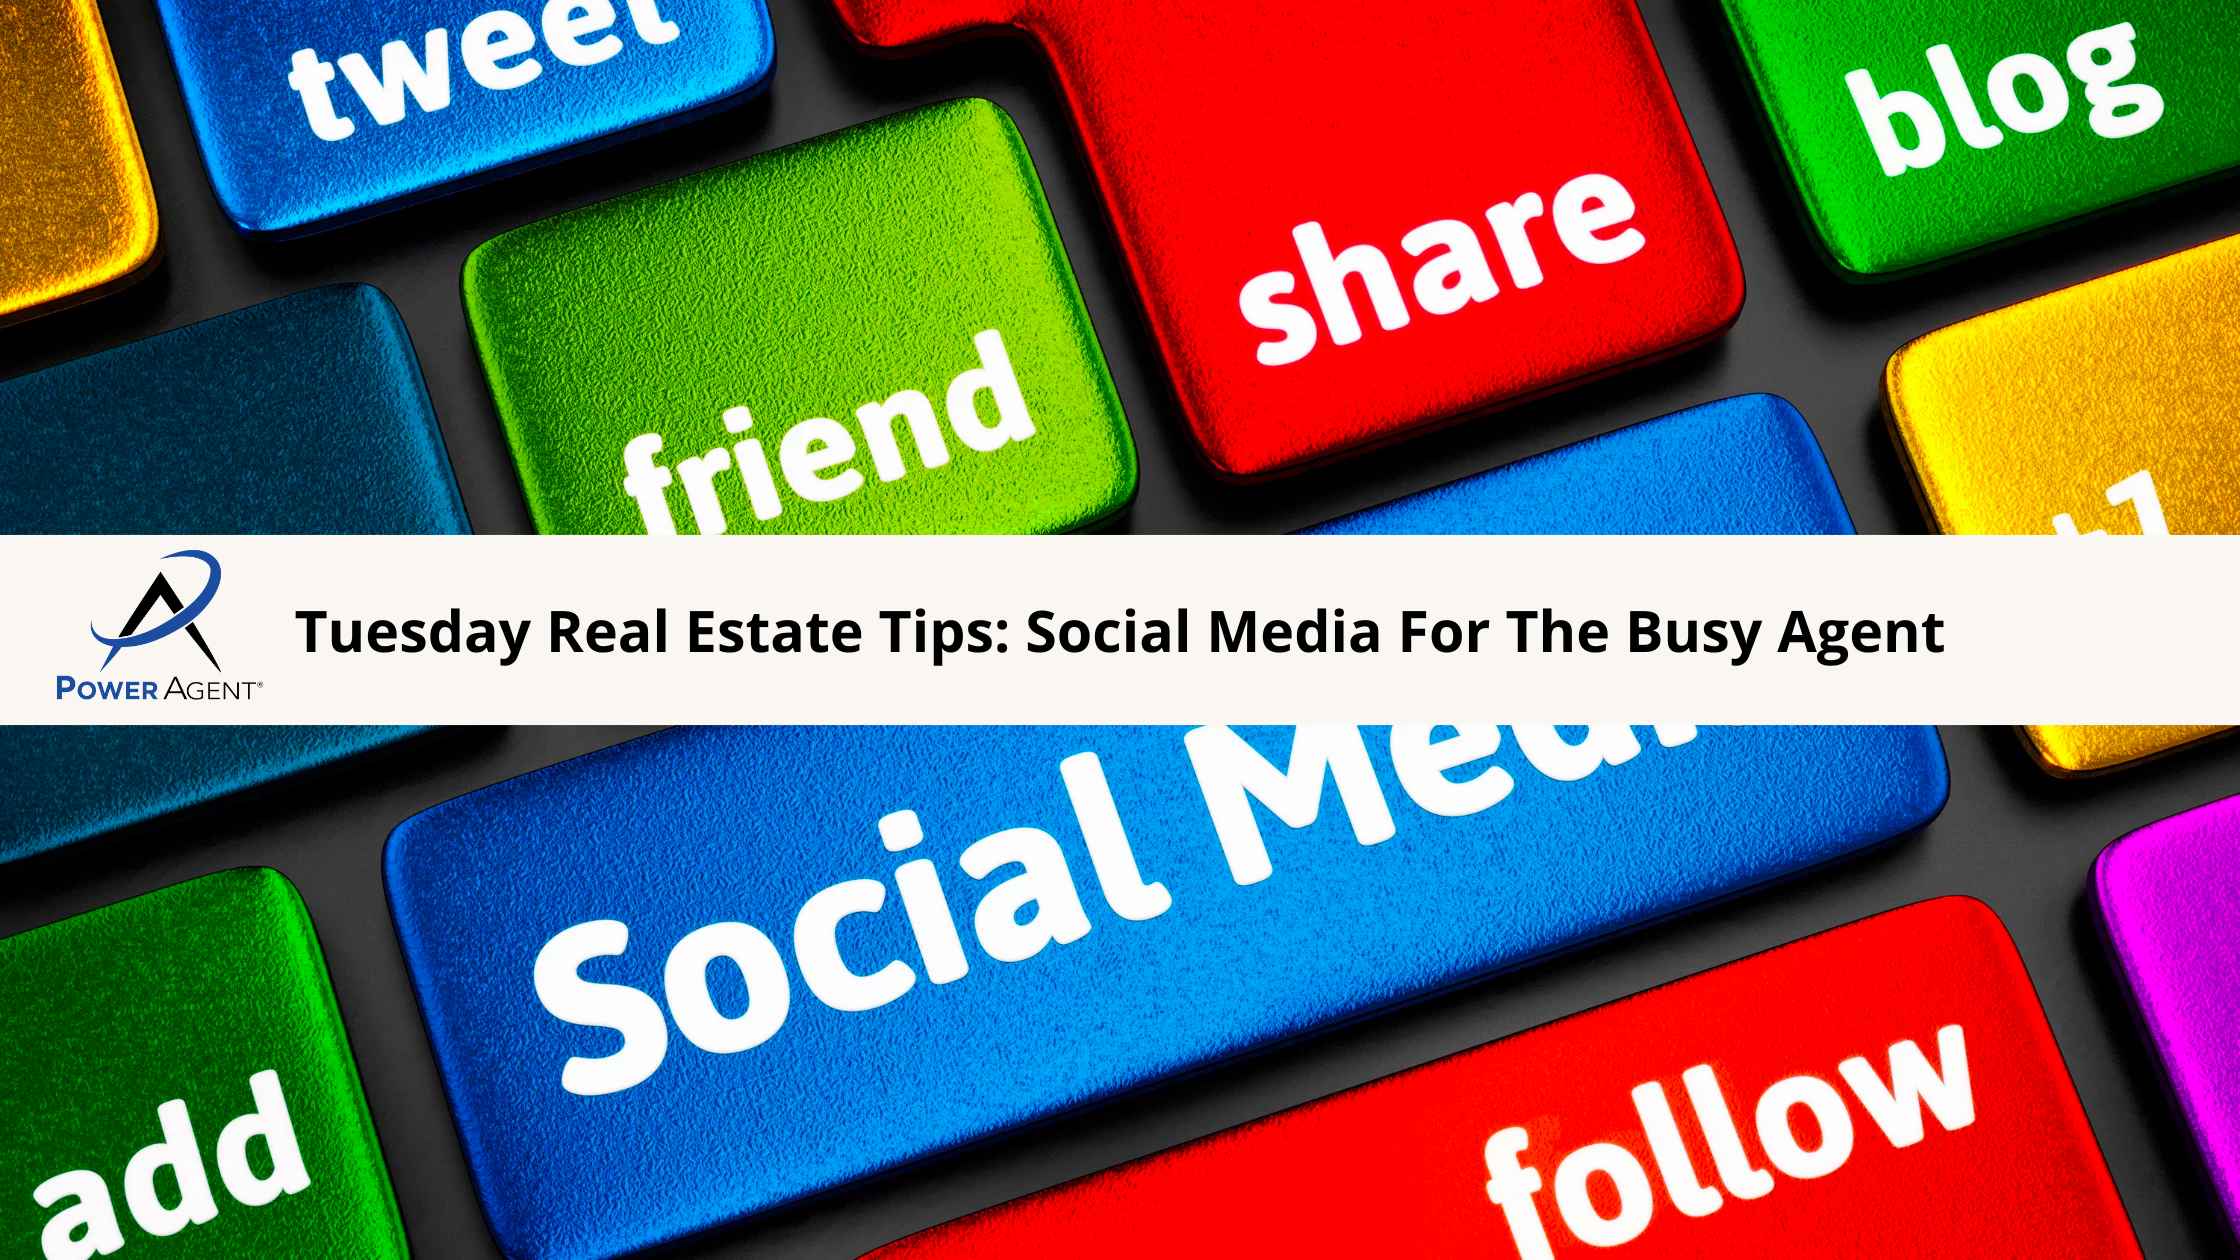 Tuesday Real Estate Tips: Social Media For The Busy Agent